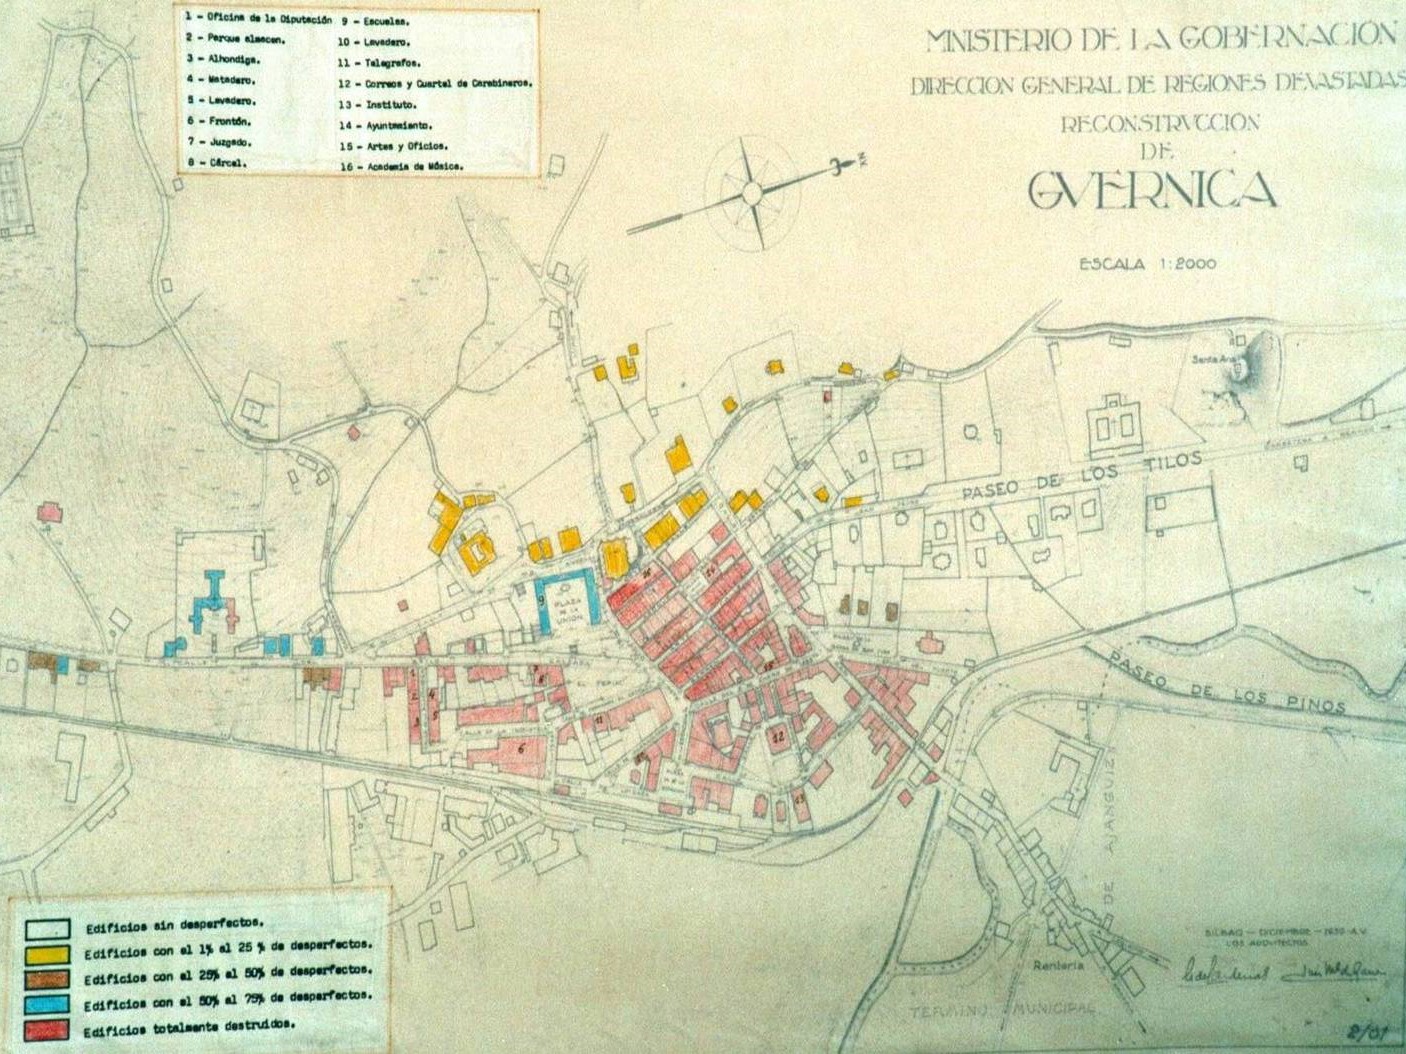 Map of Gernika showing much of the town center destroyed as indicated by red squares where buildings would have been